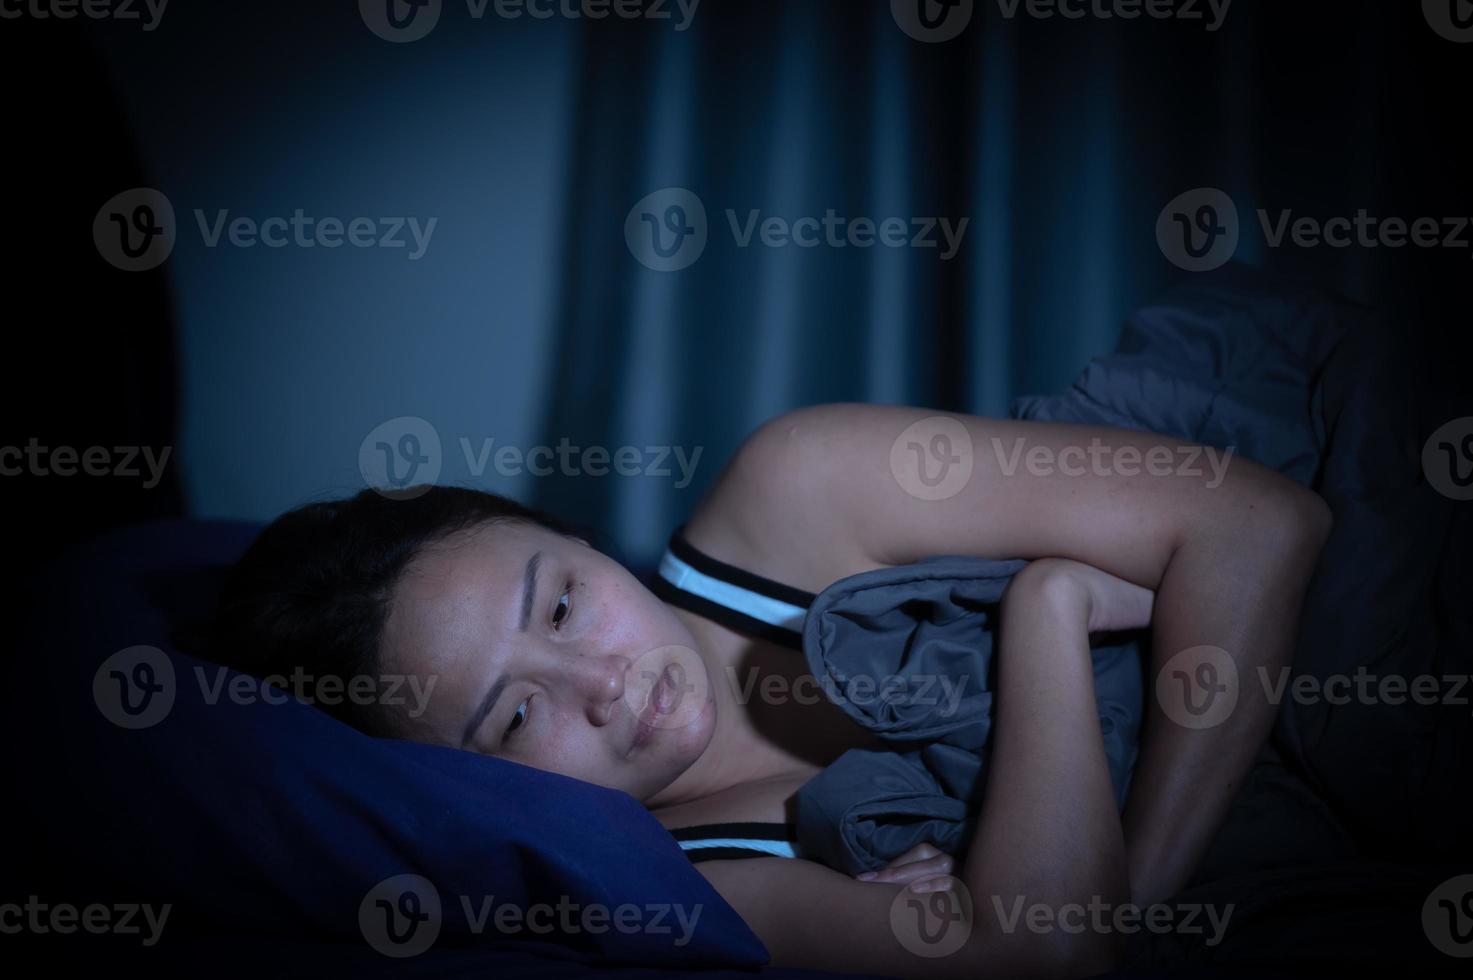 Asian women have a high concern that is why she can't sleep.Have stress from work photo